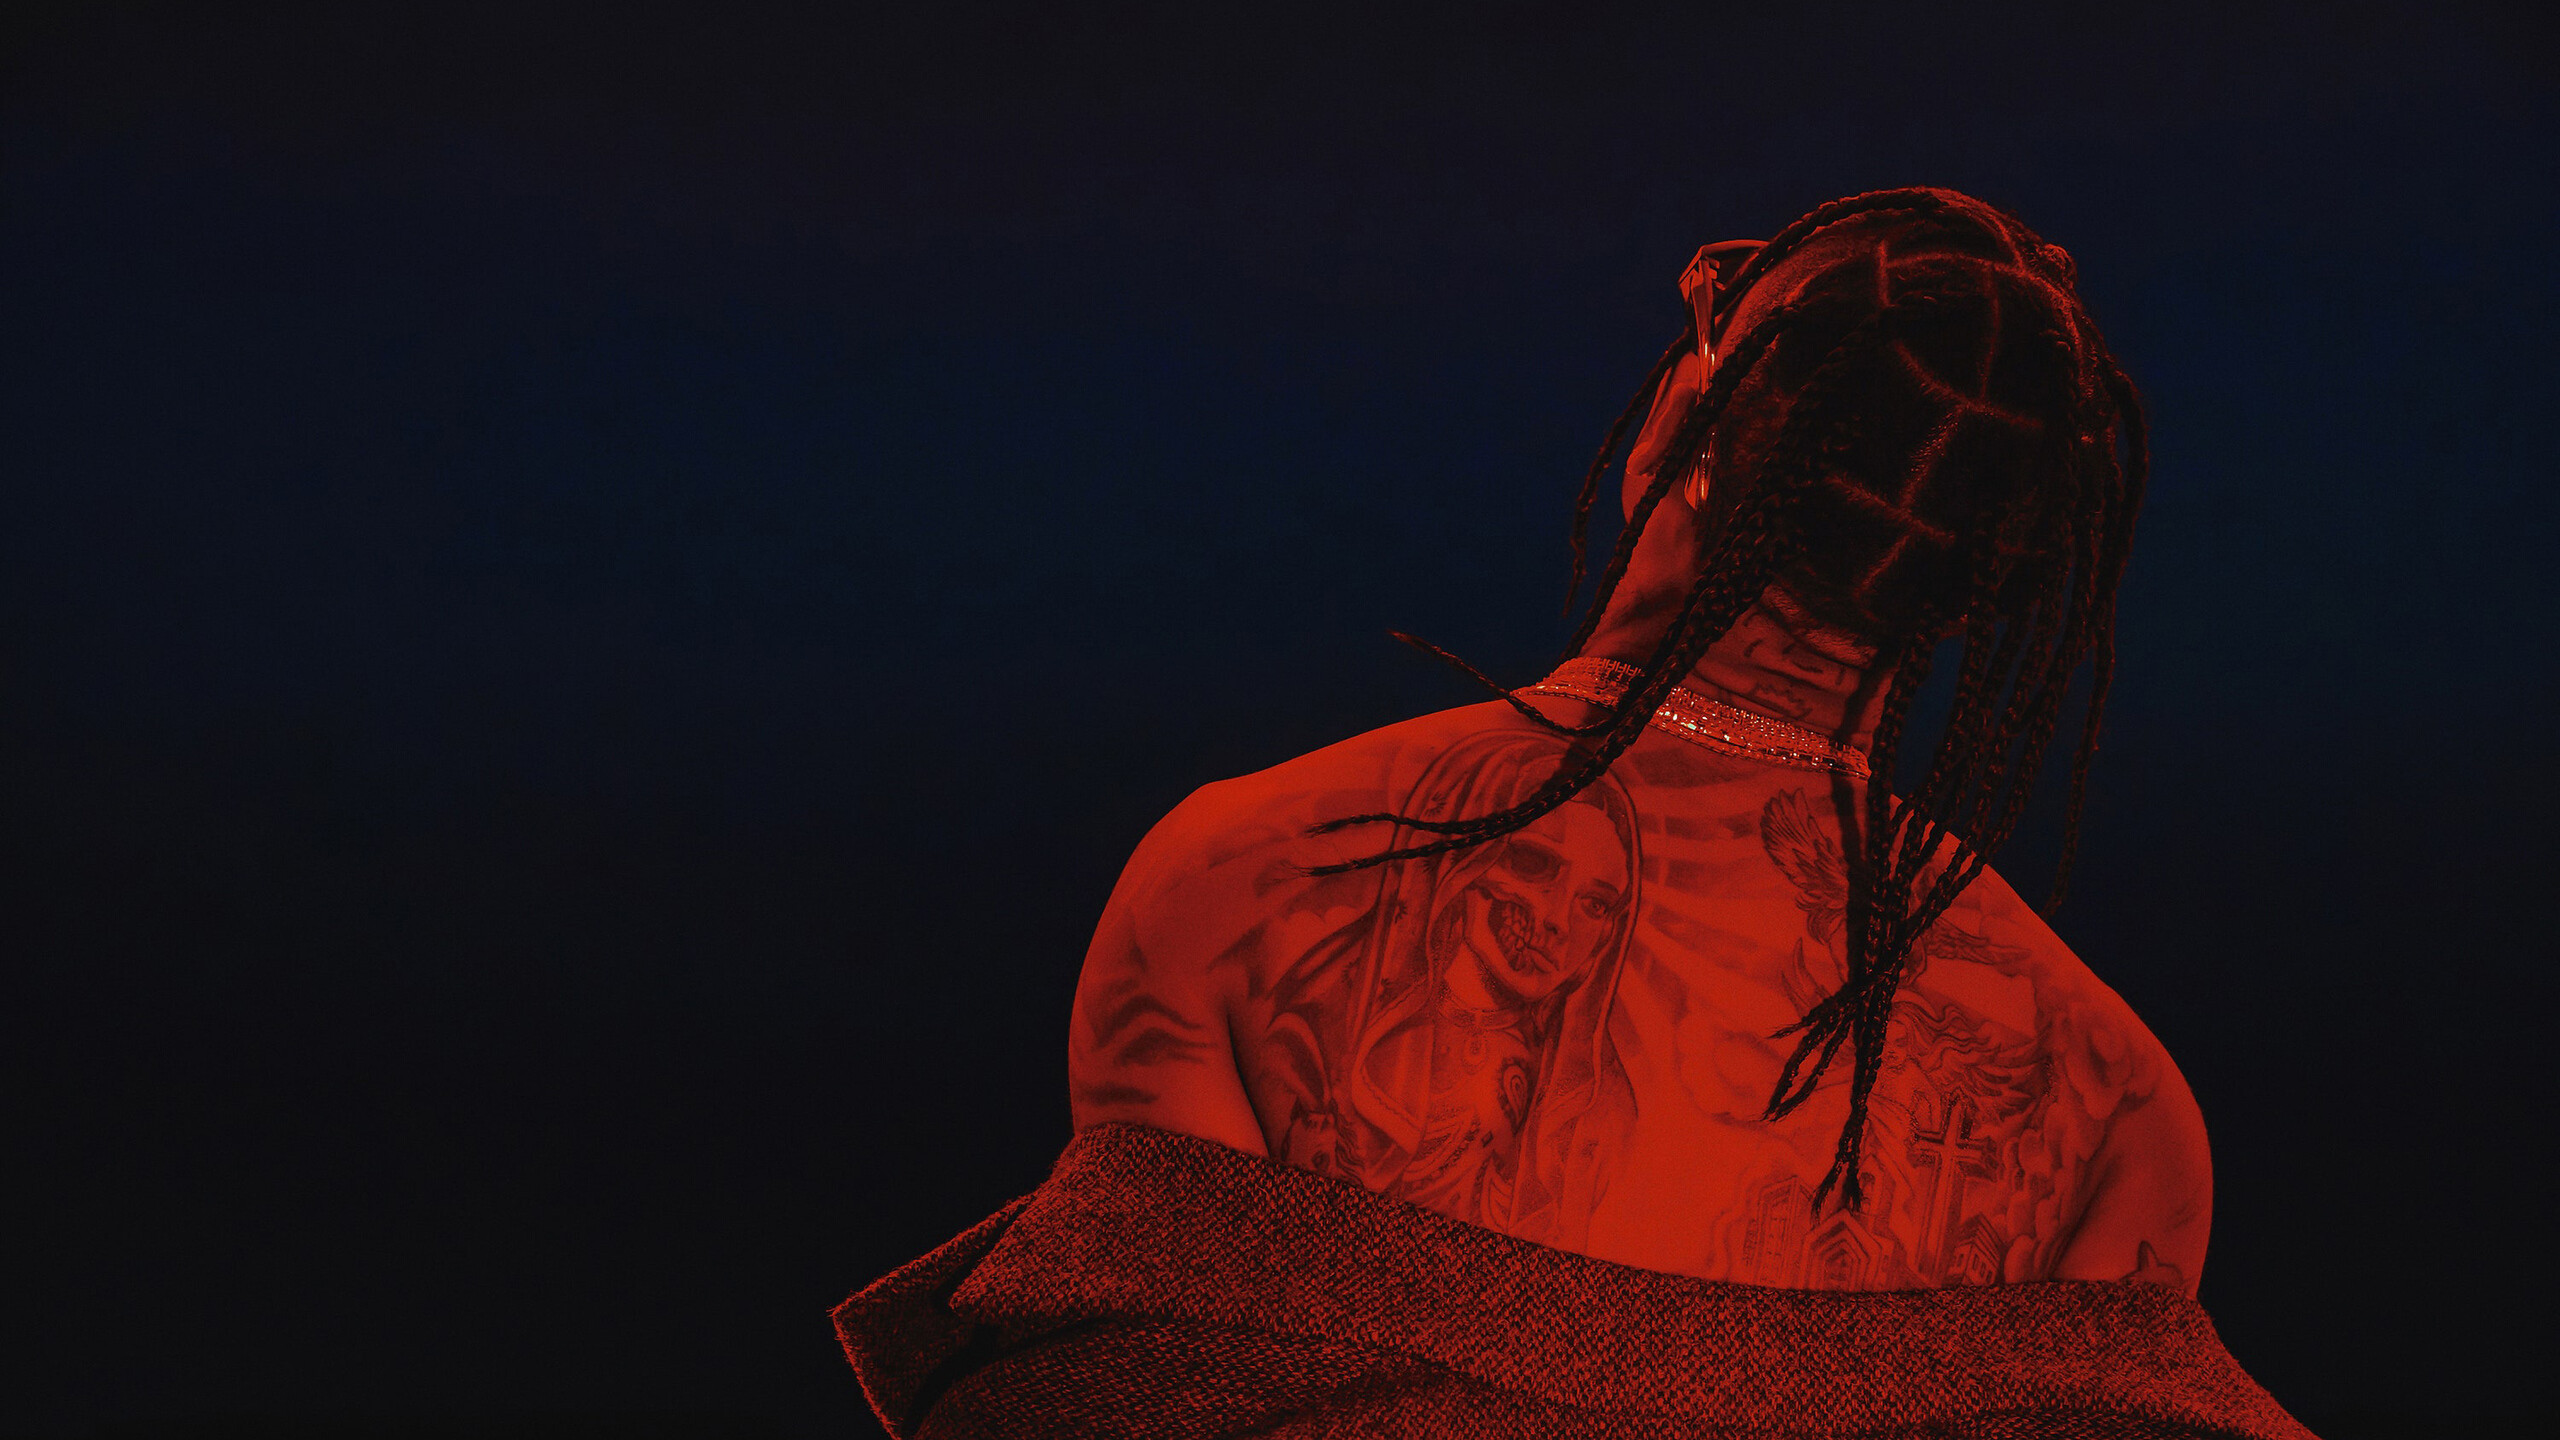 Travis Scott: The chart-topping Houston rapper known for his hyperkinetic live shows. 2560x1440 HD Wallpaper.